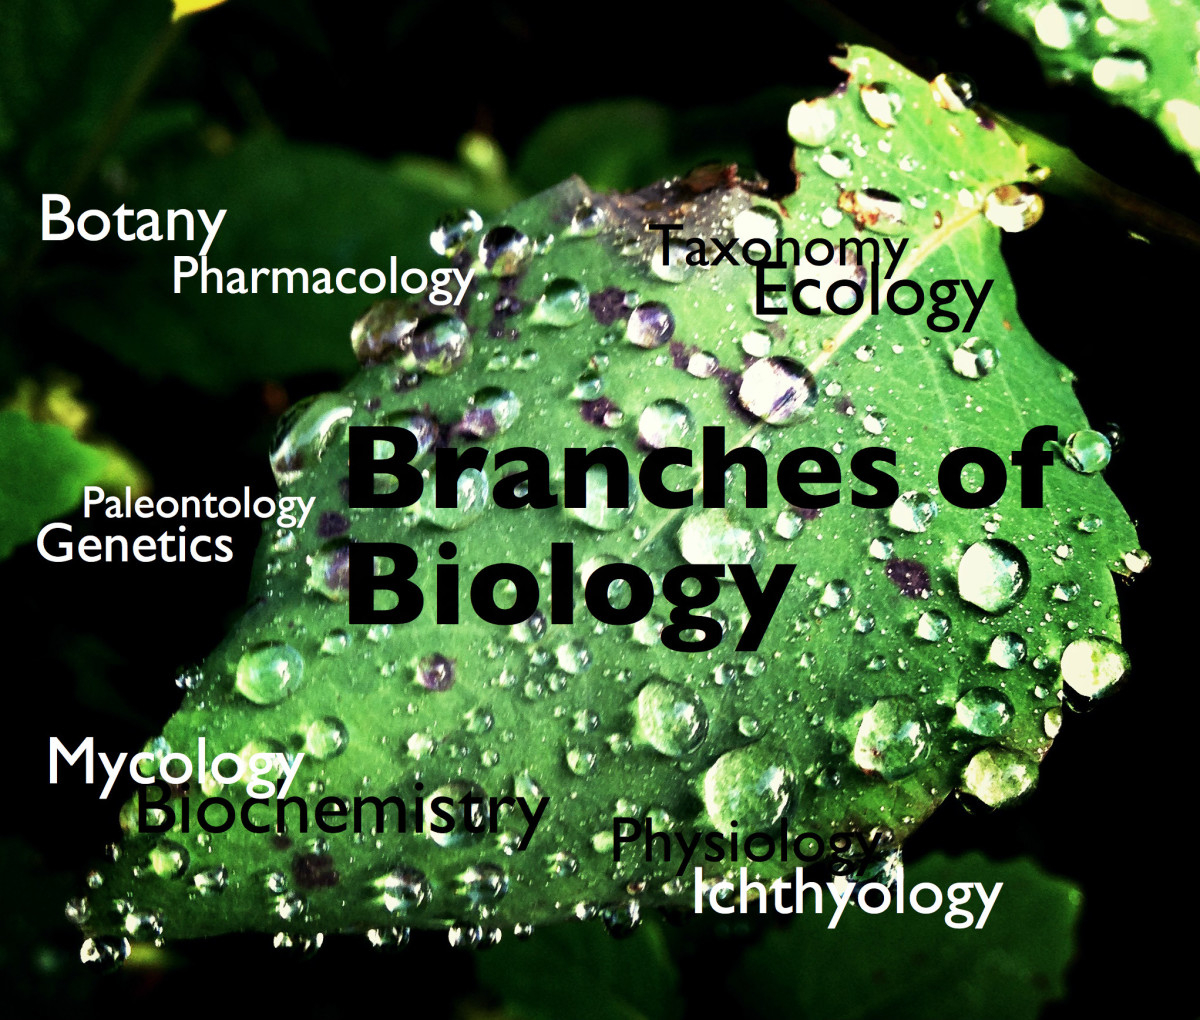 three branches of biology